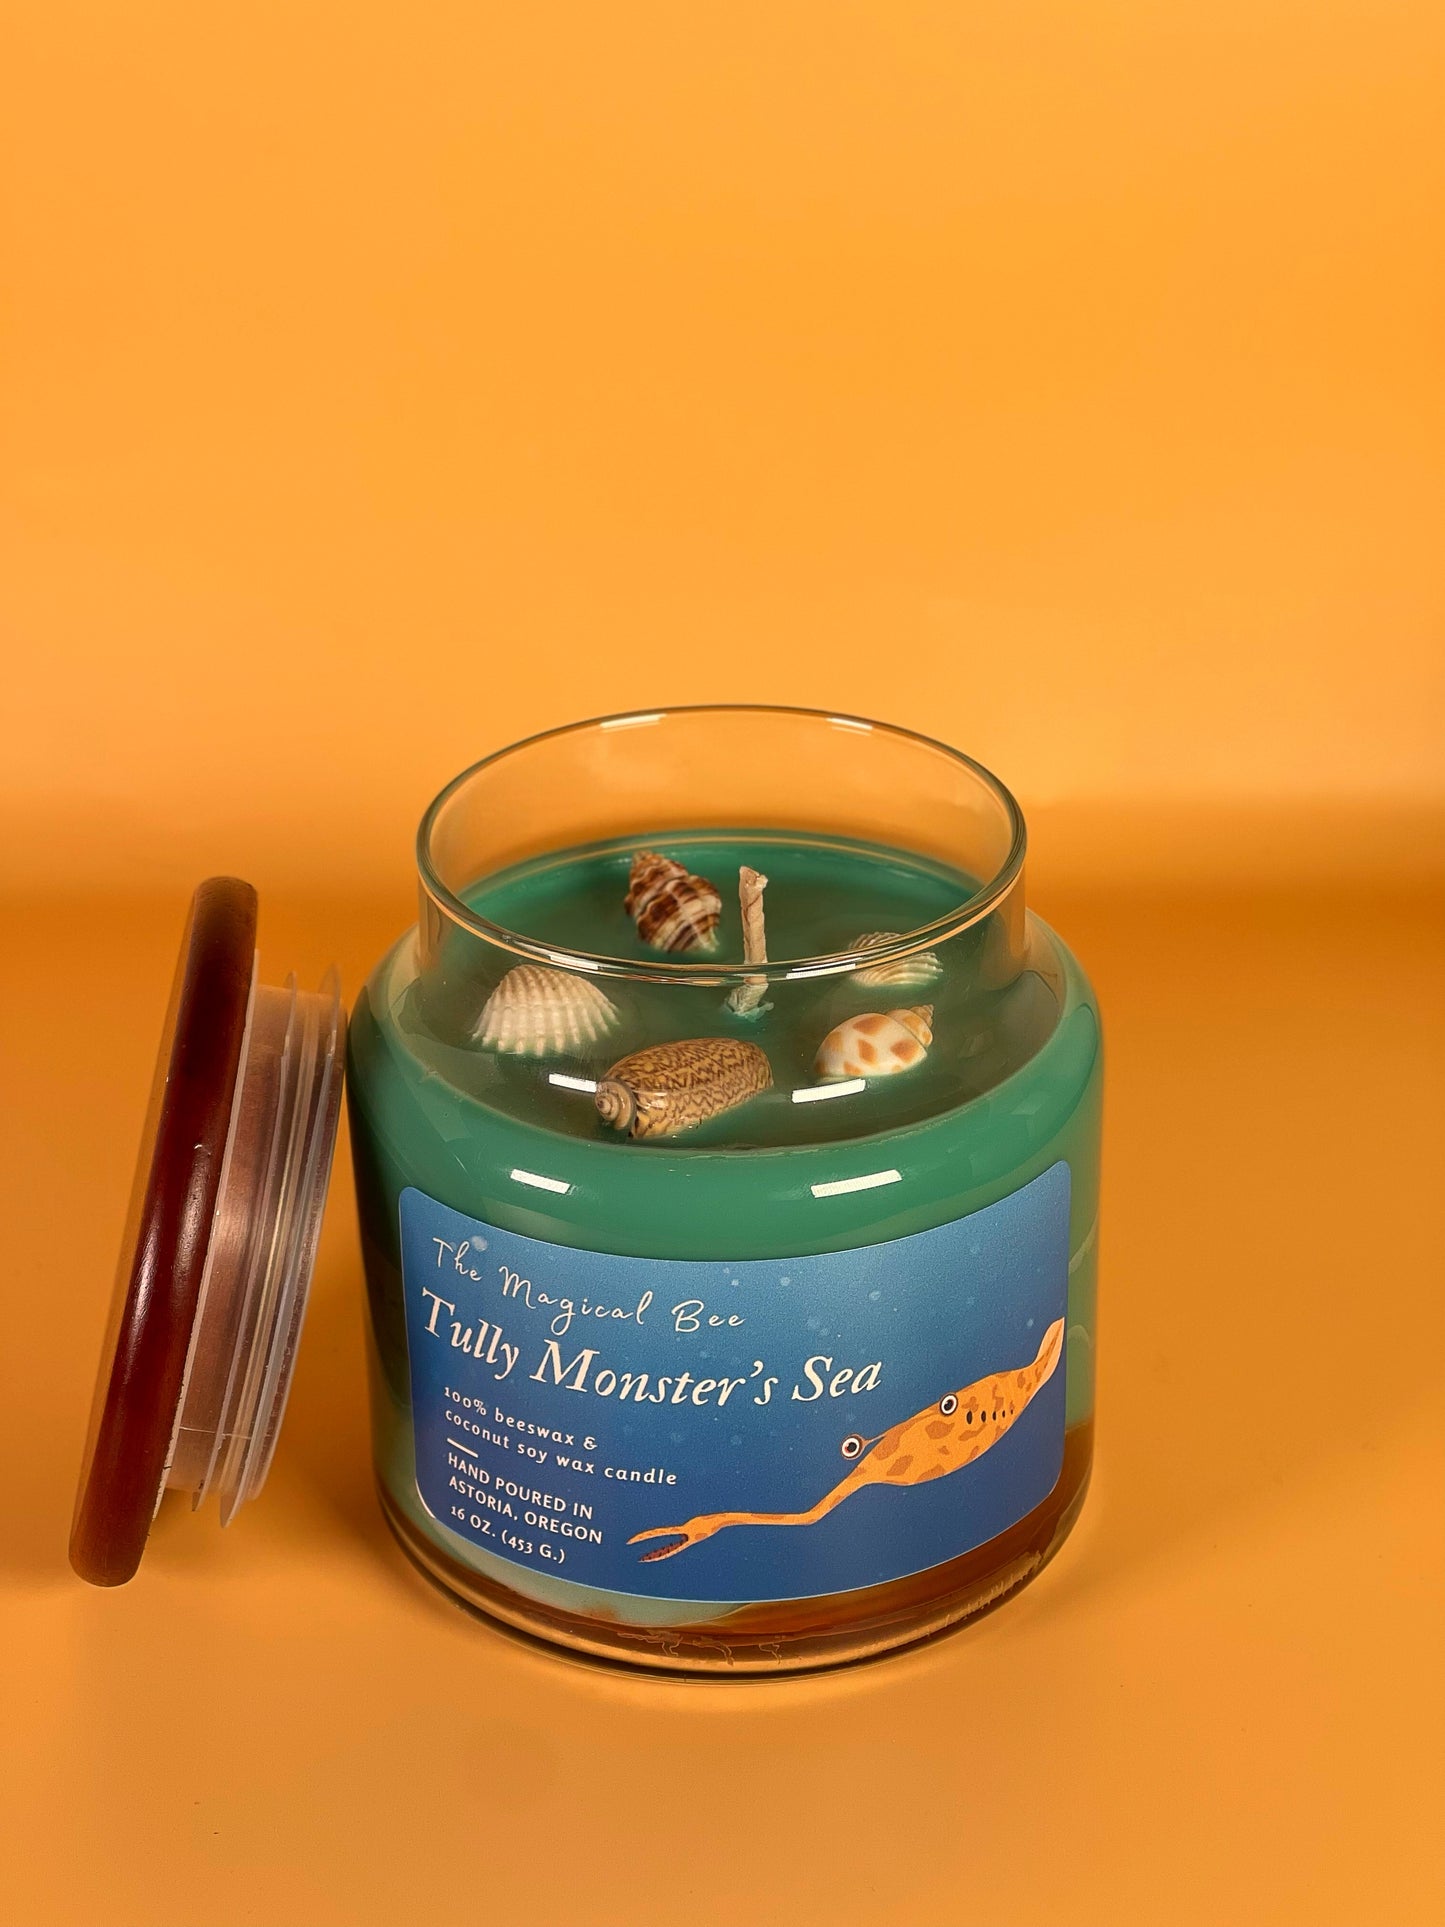 Tully Monster's Sea Candle